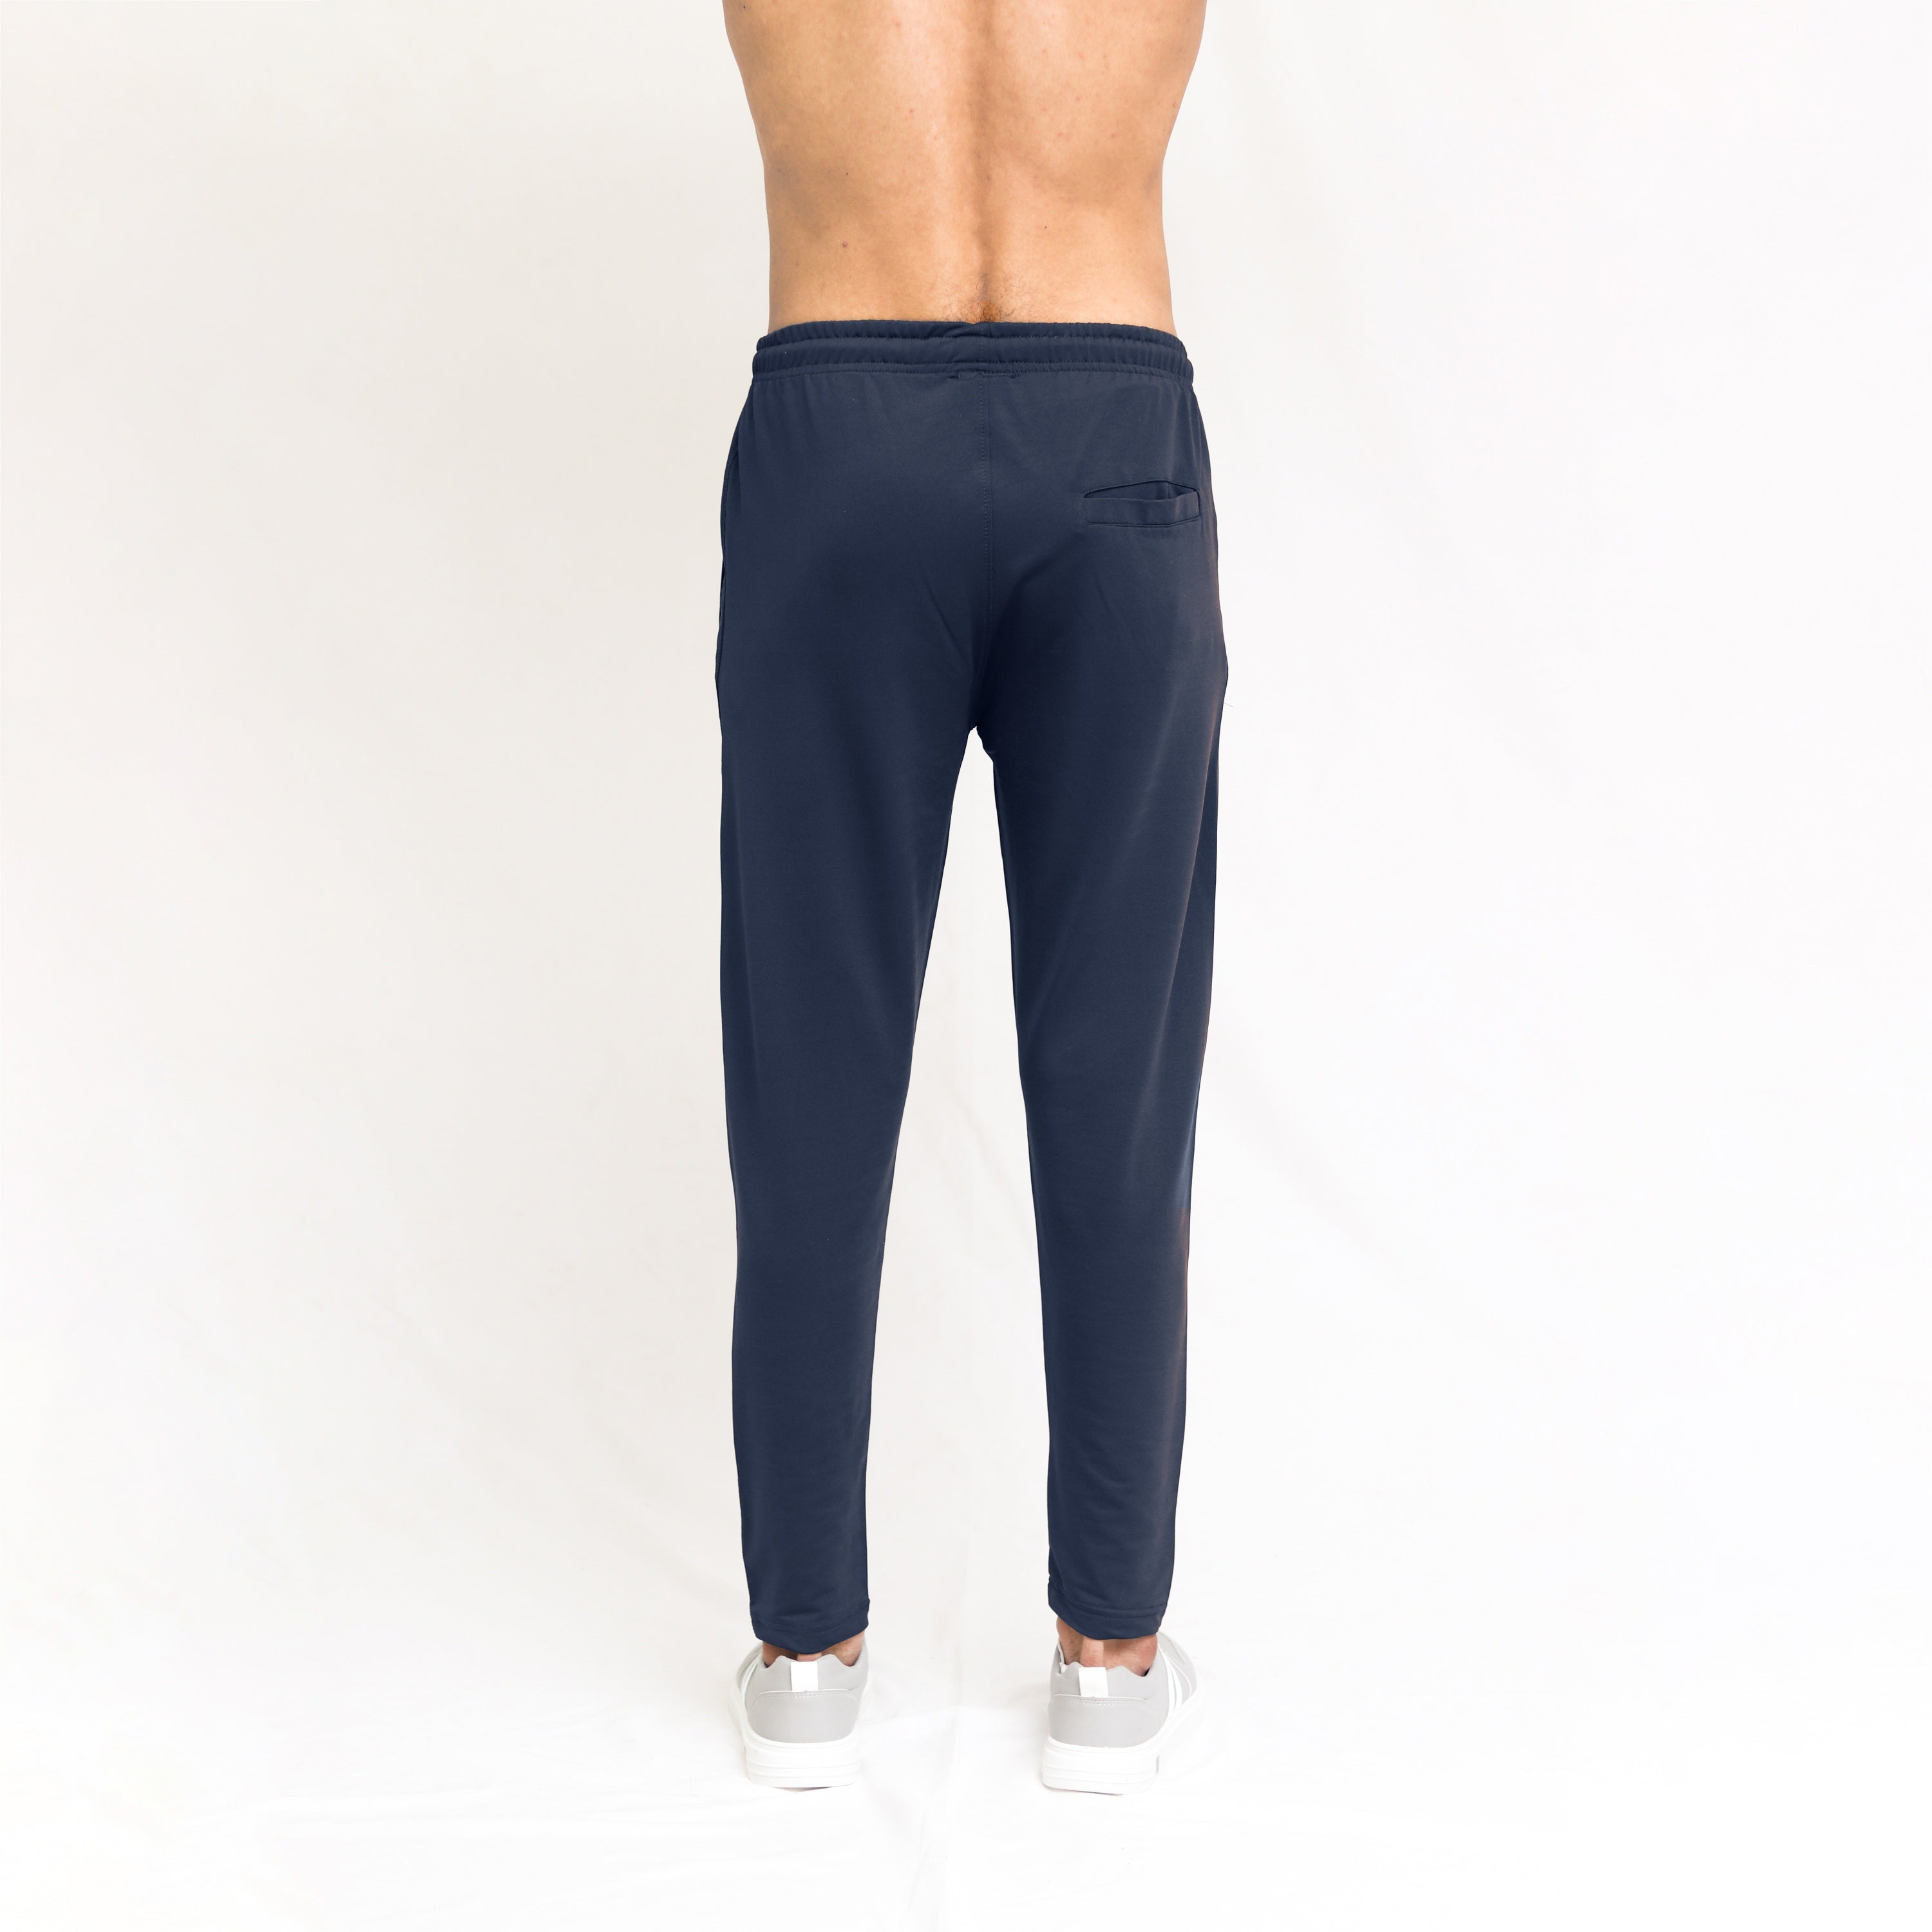 Navy Lycra Quick Dry Trouser with Three Stripes